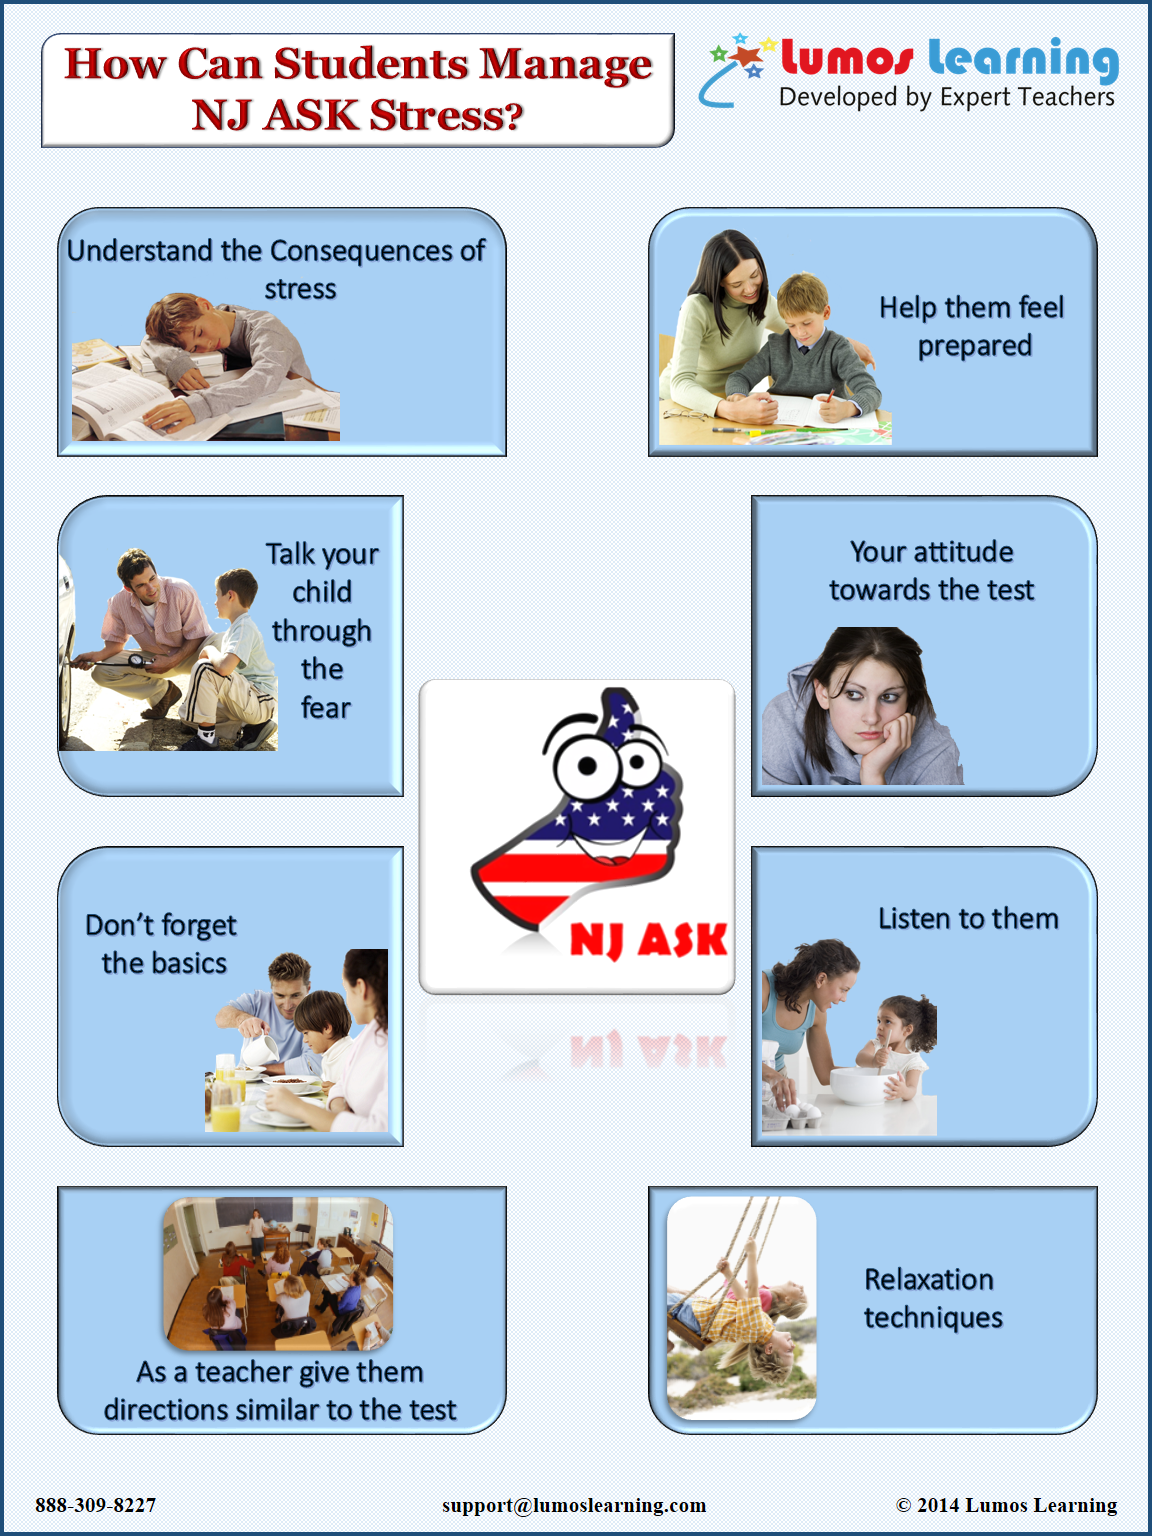 How students can manage NJ ASK stress